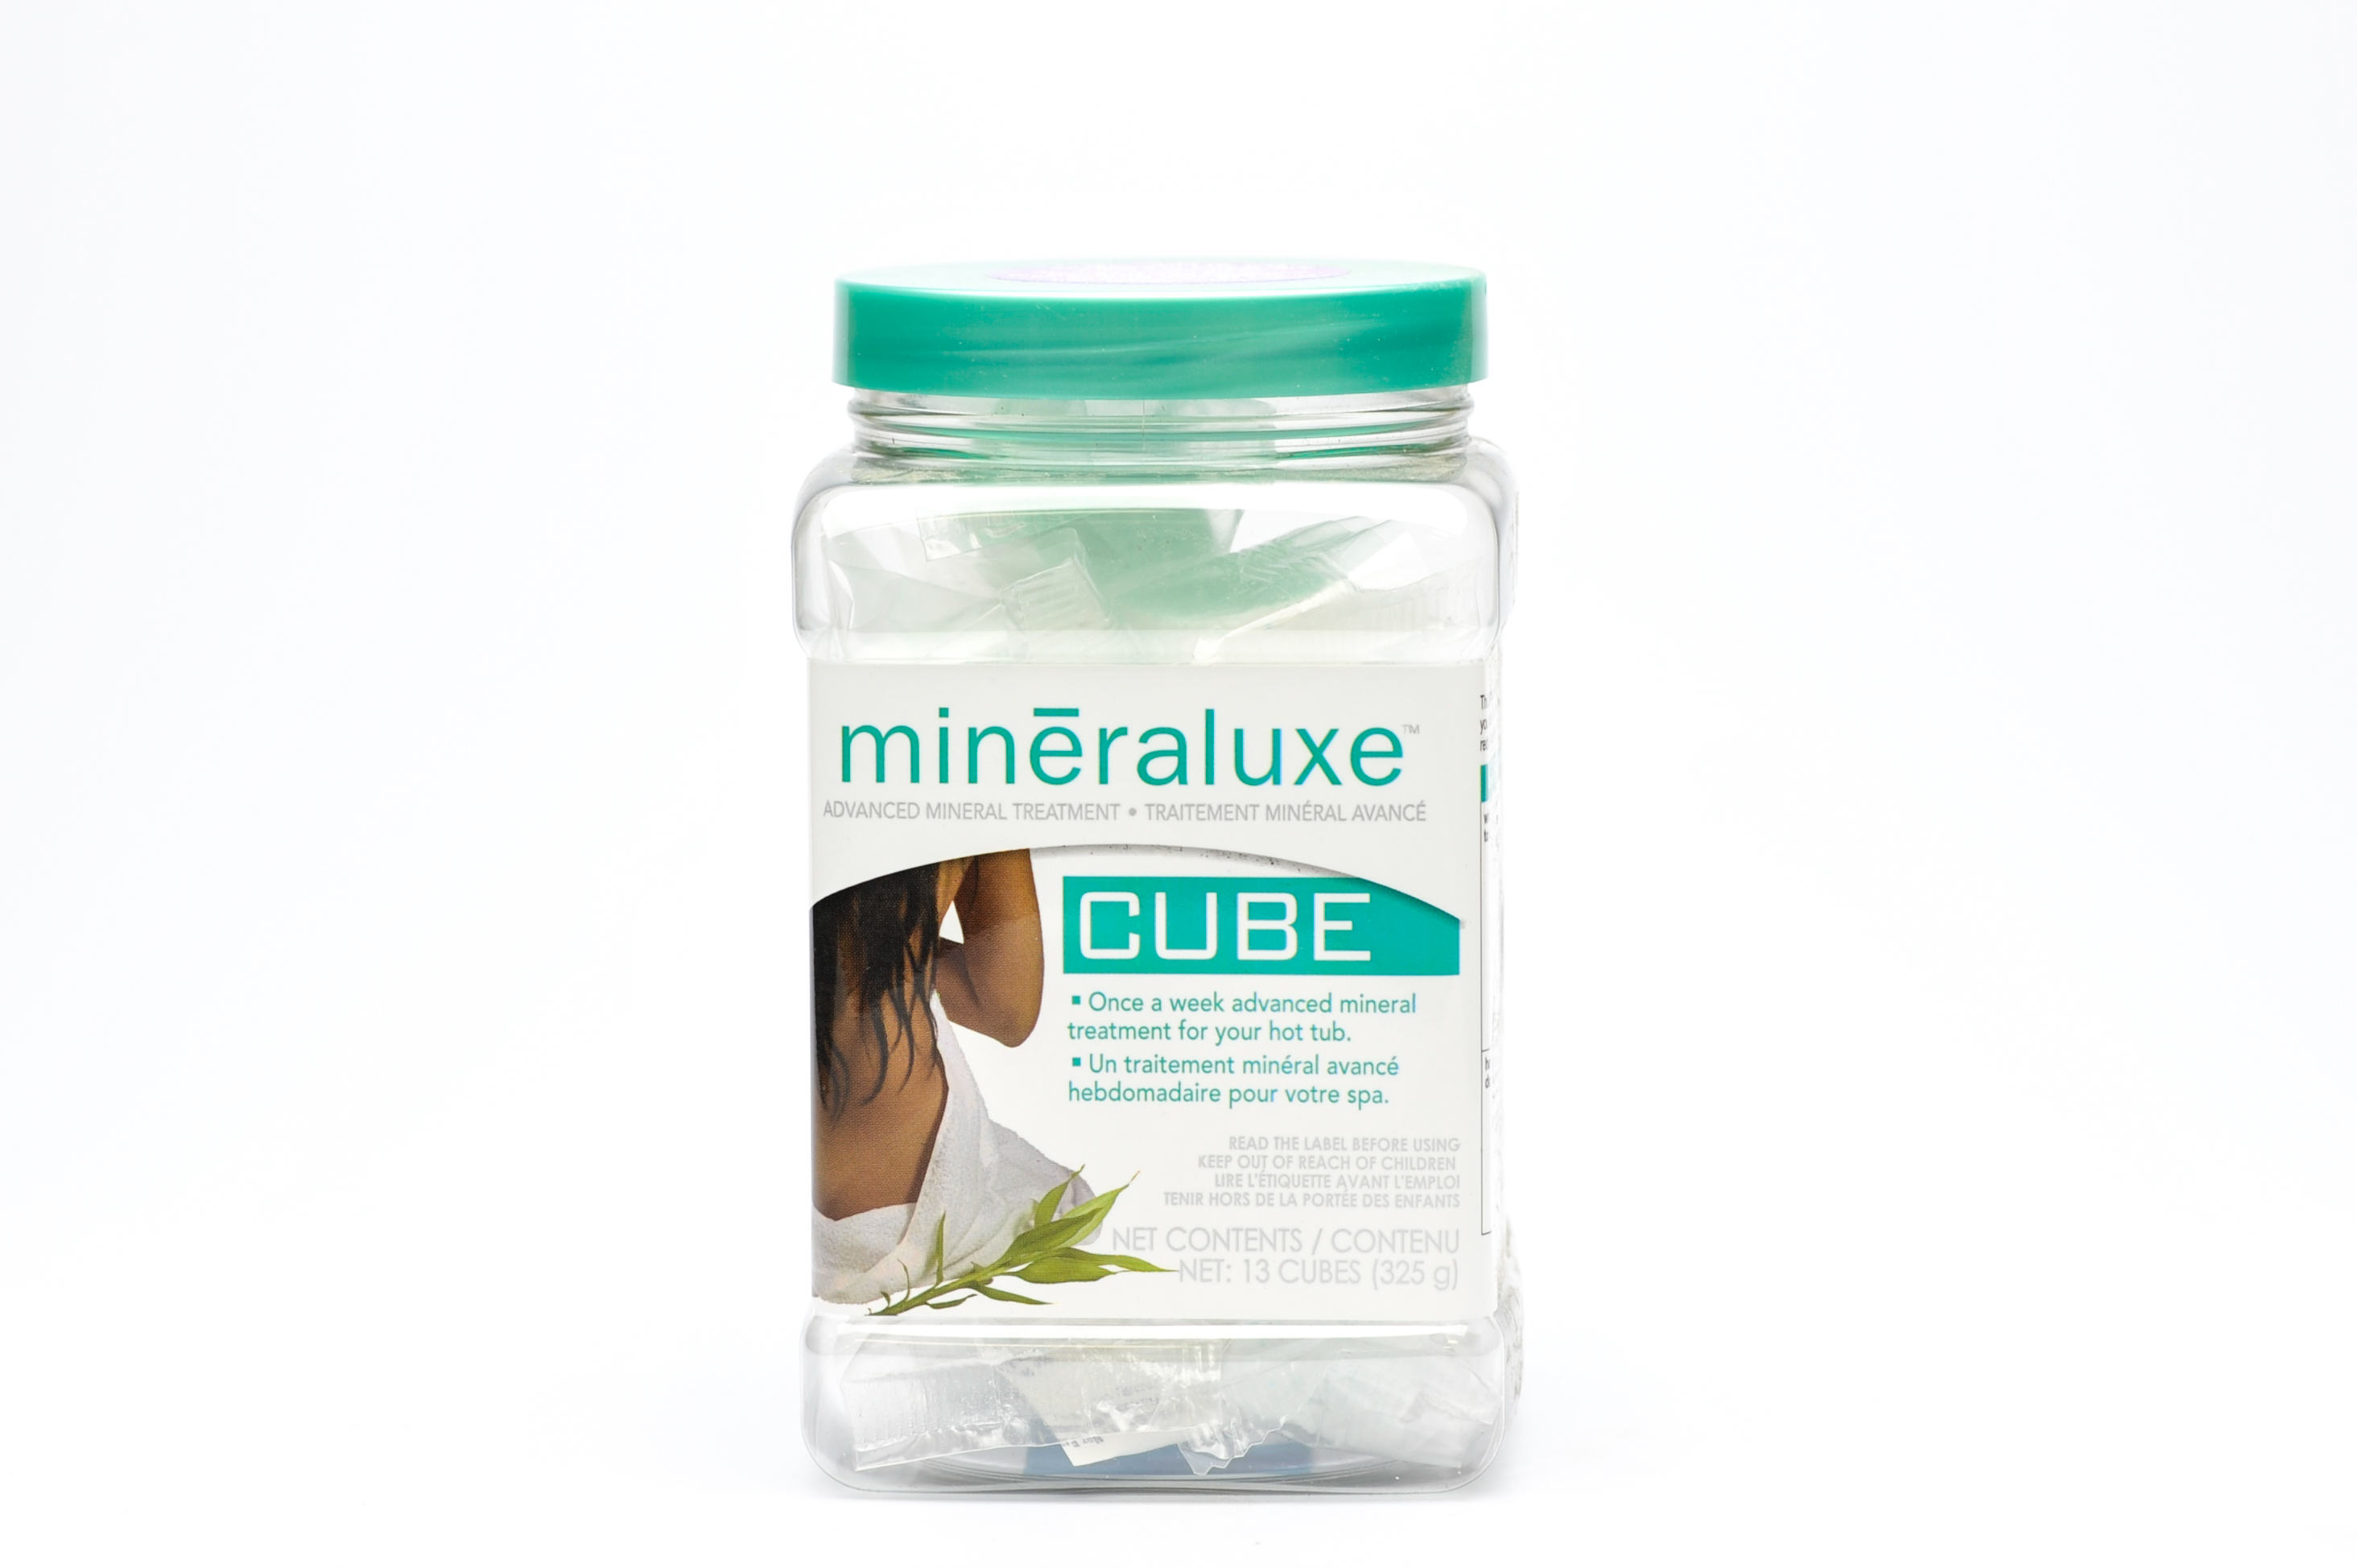 Mineraluxe Cubes 8 Per Case - LINERS